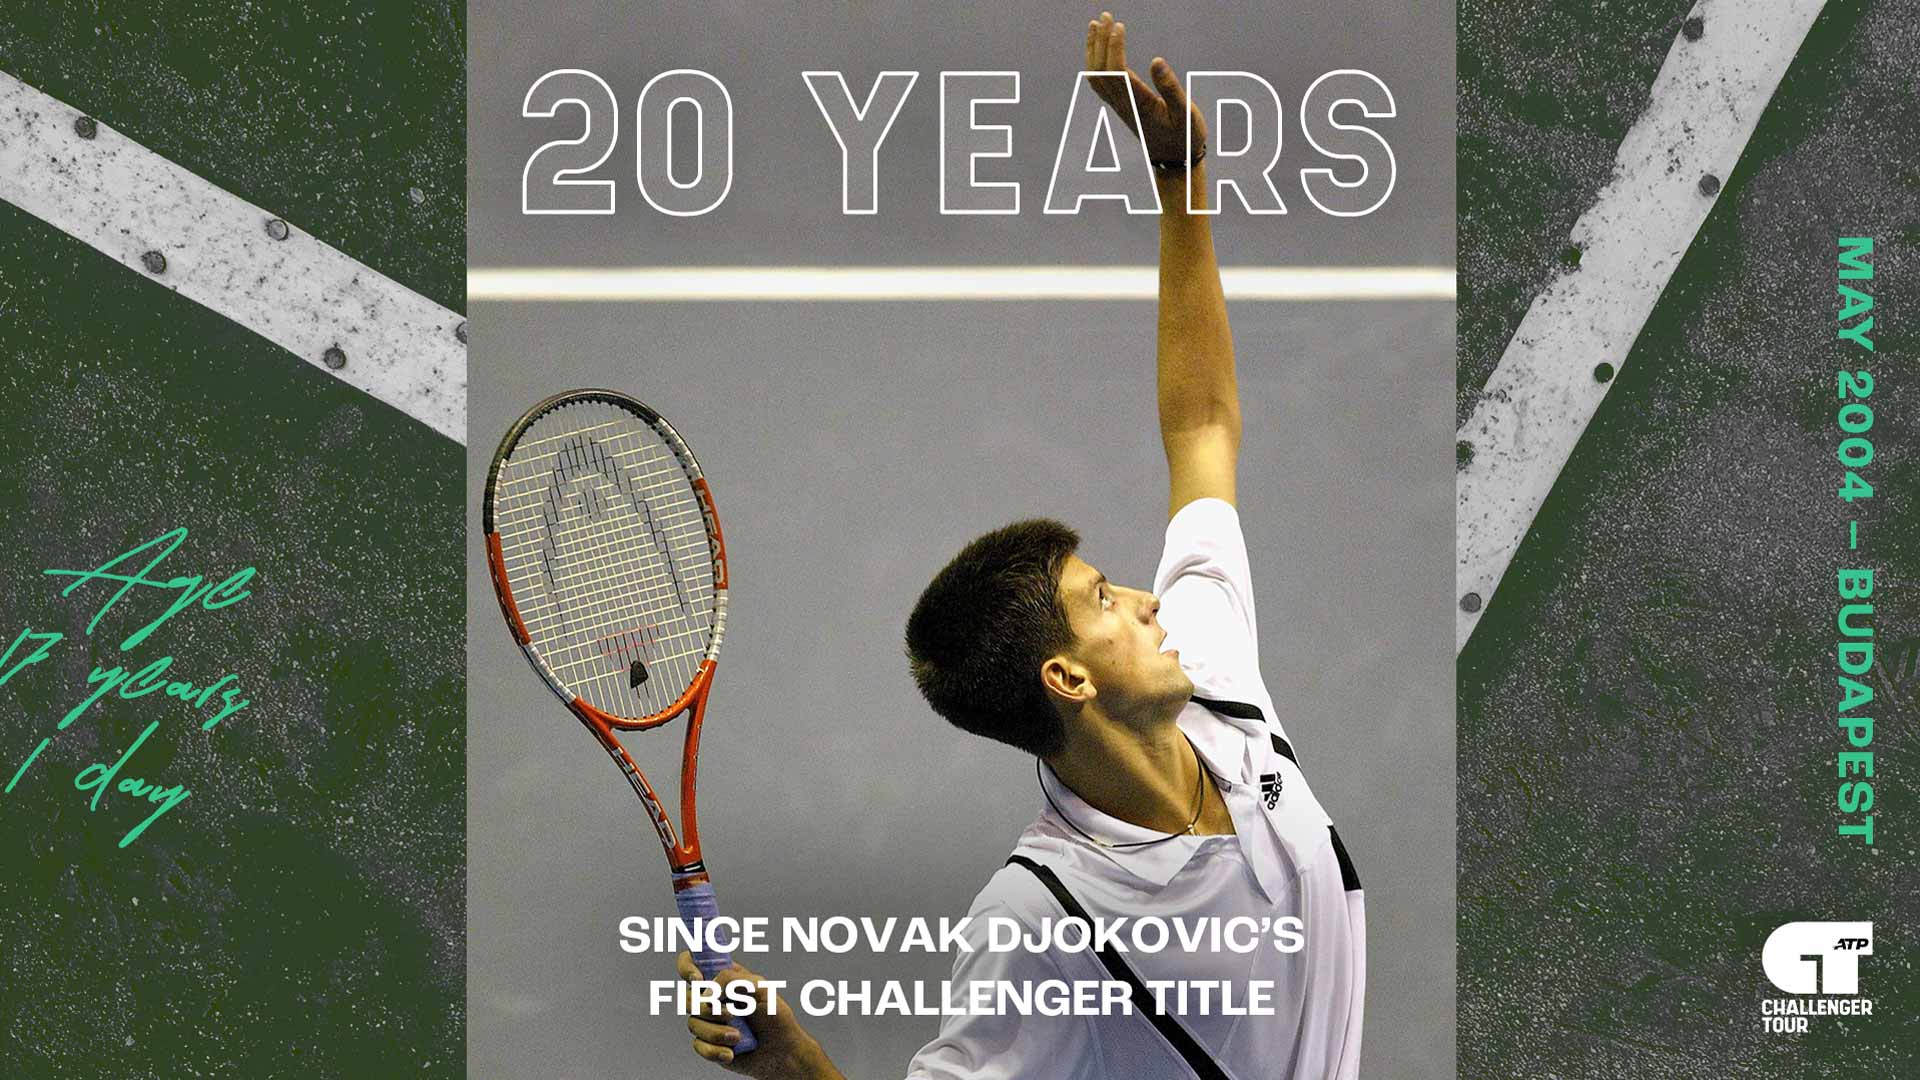 Djokovic's first Challenger title: 20 years on...